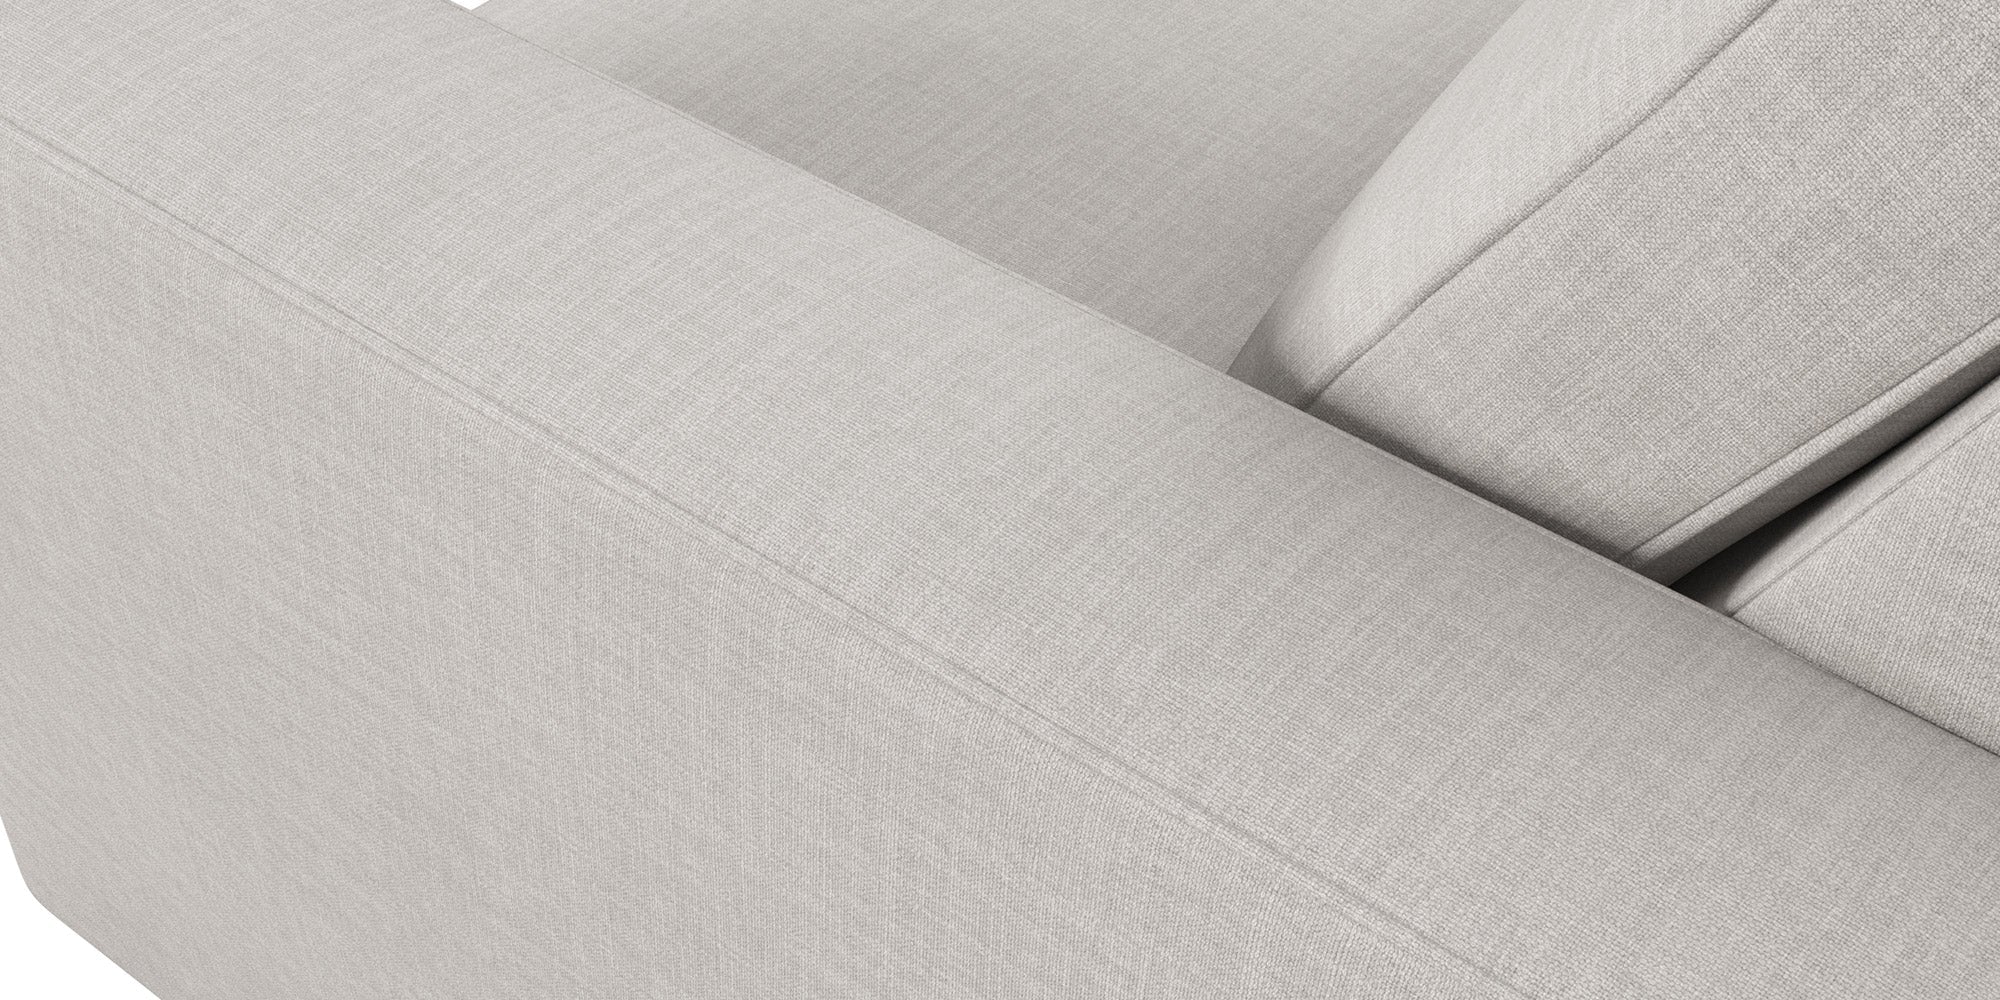 IRL: Rio Sofa, shown here in Texture Haze fabric and Dave Cafe legs.